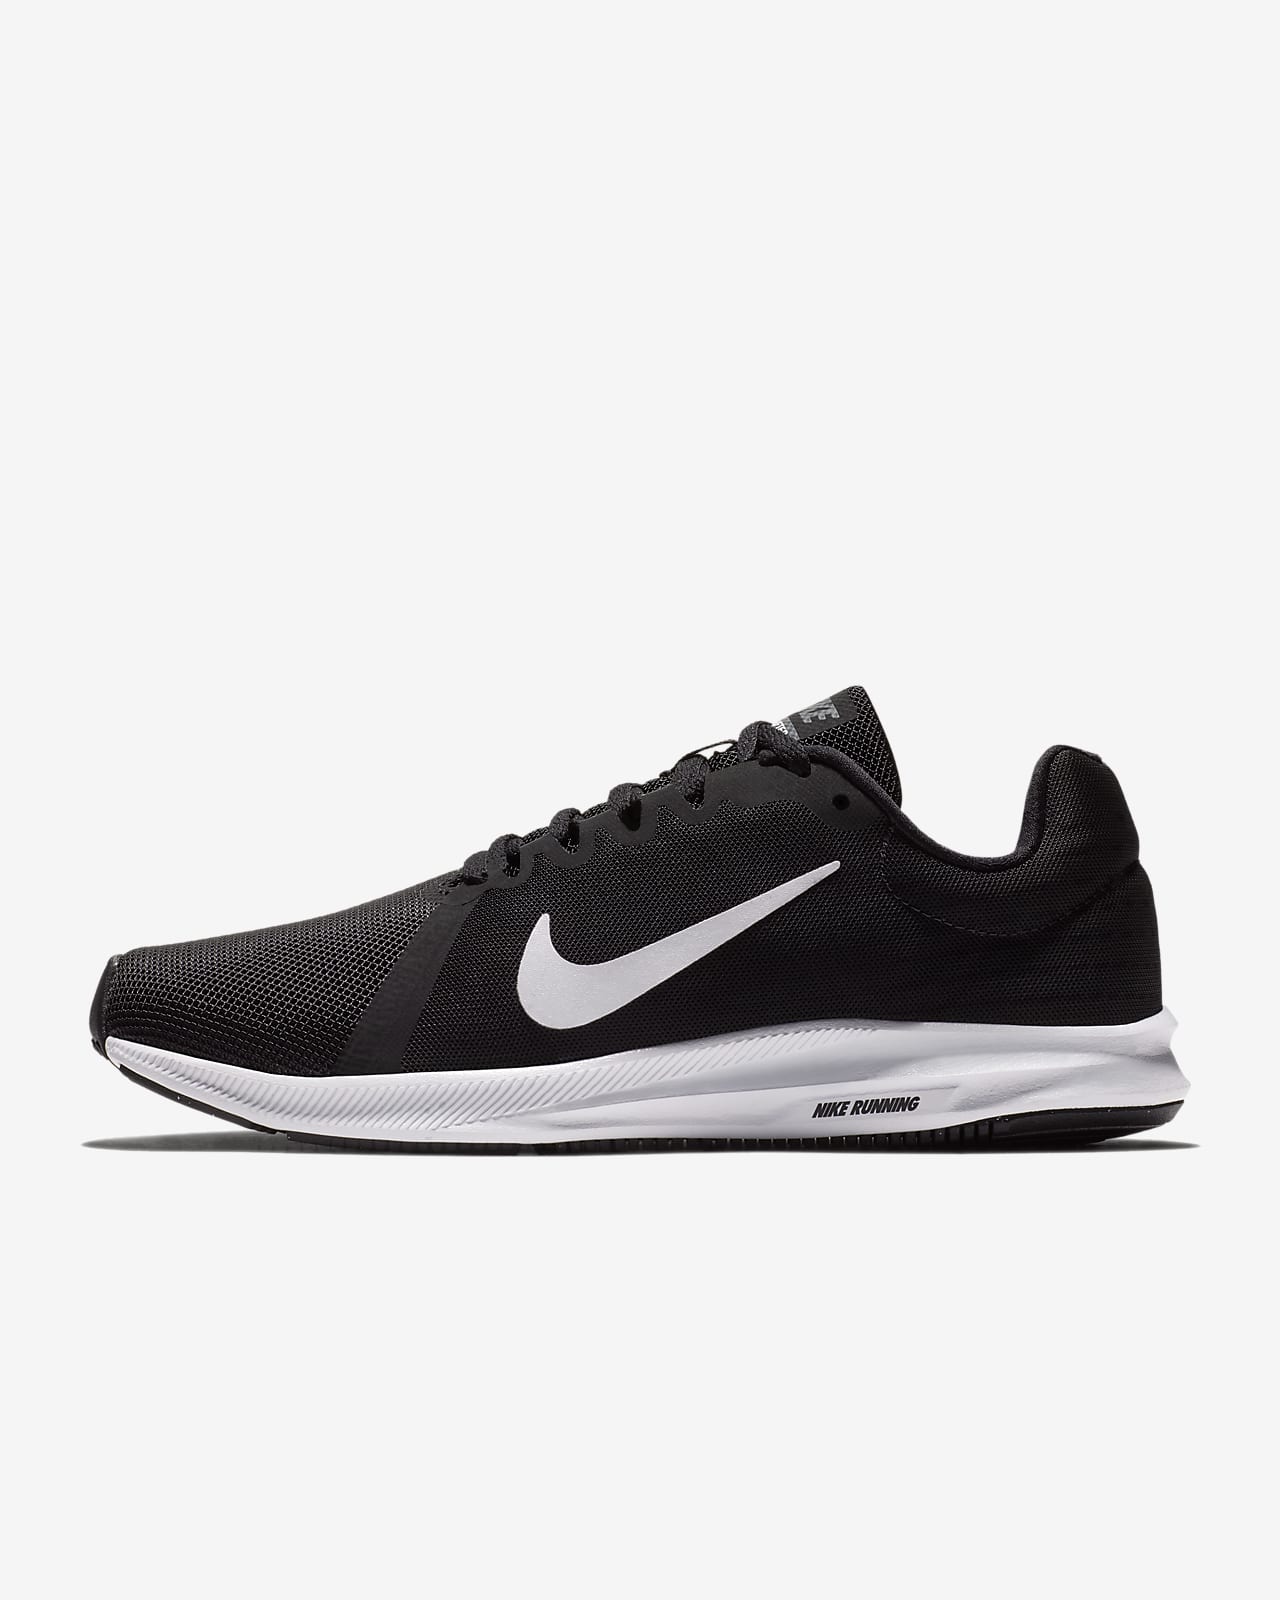 nike running downshifter 8 review online -